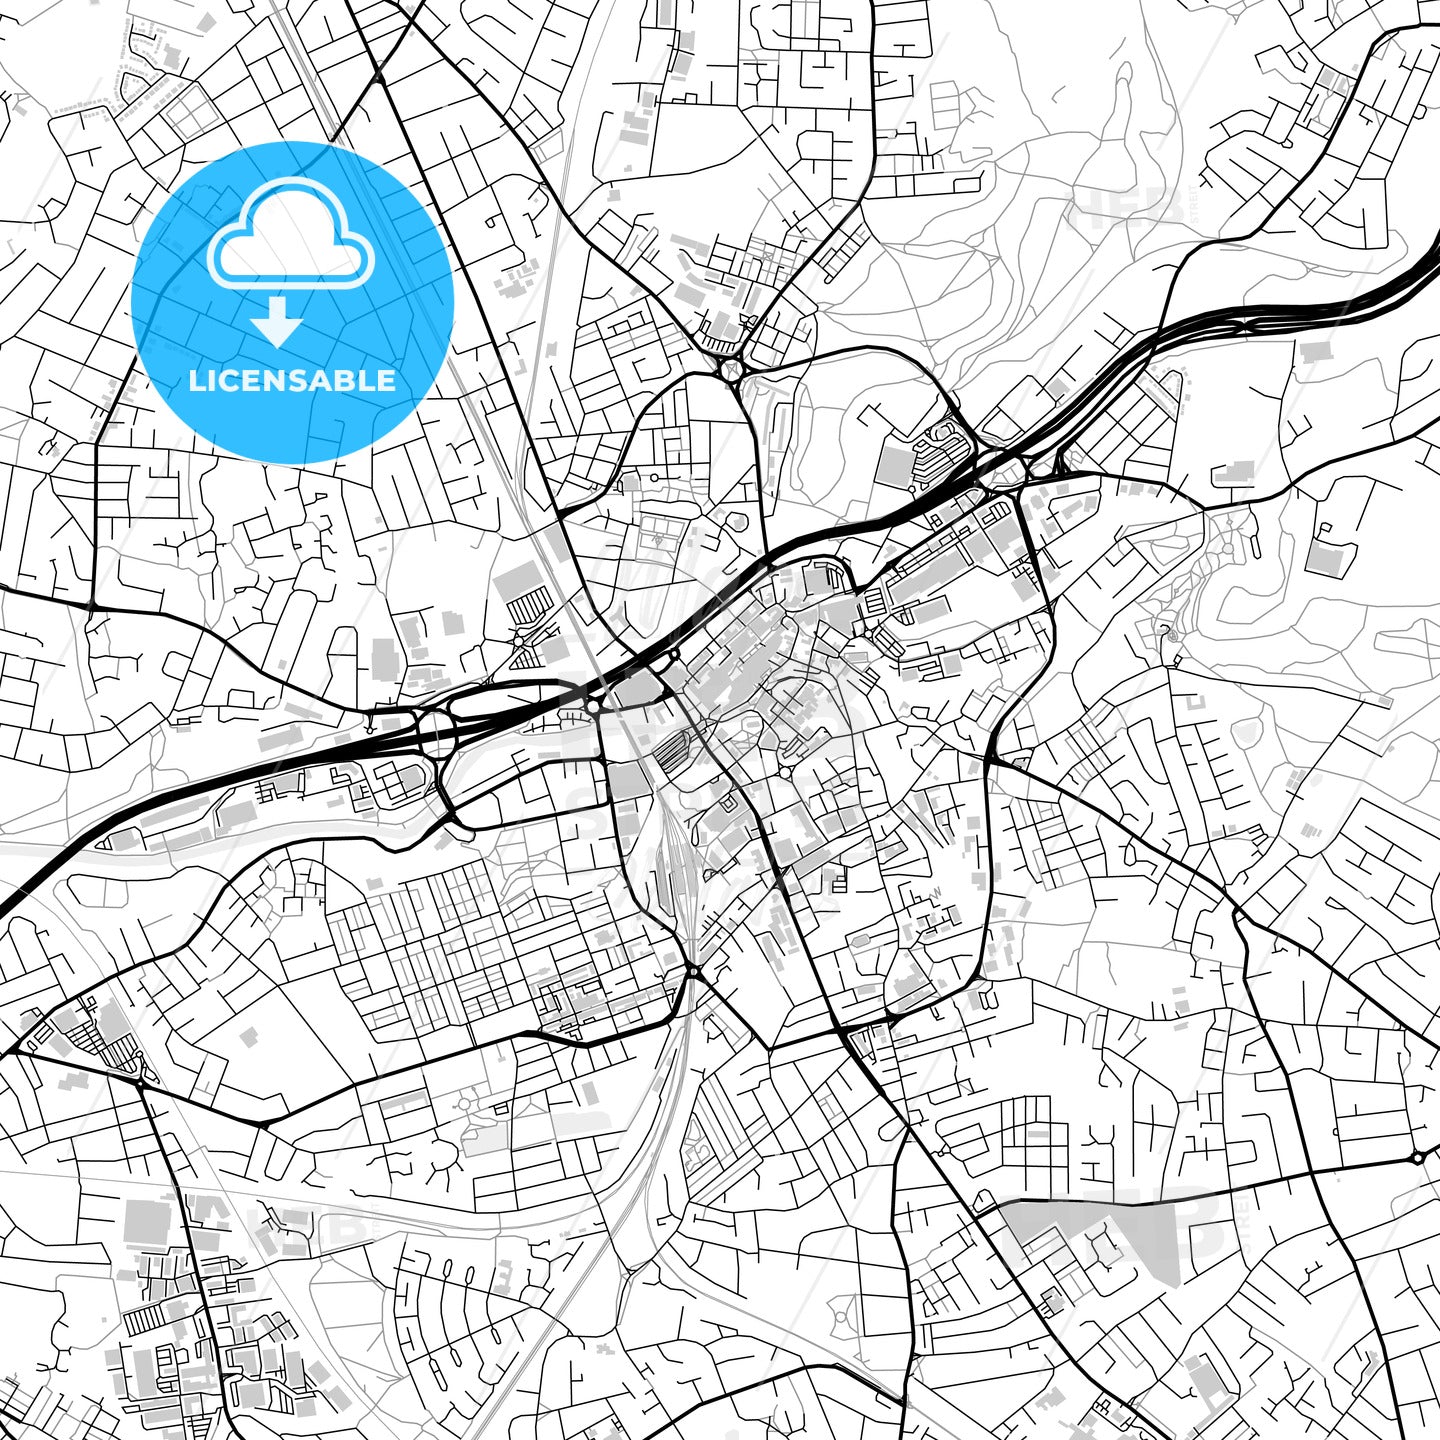 Downtown map of Stockport, light